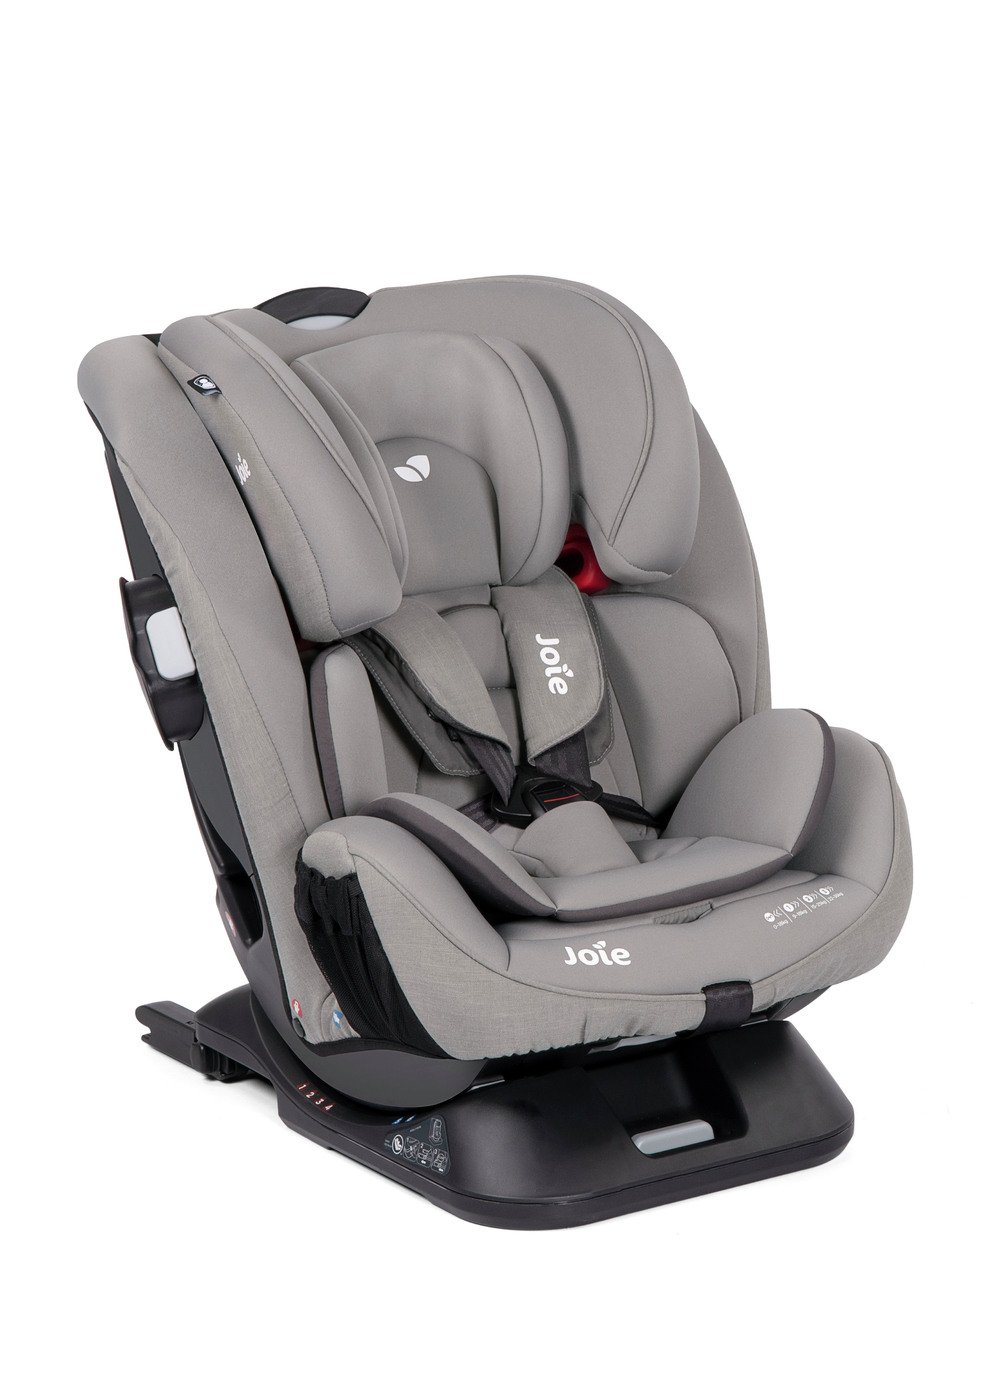 car seat 2 year old isofix